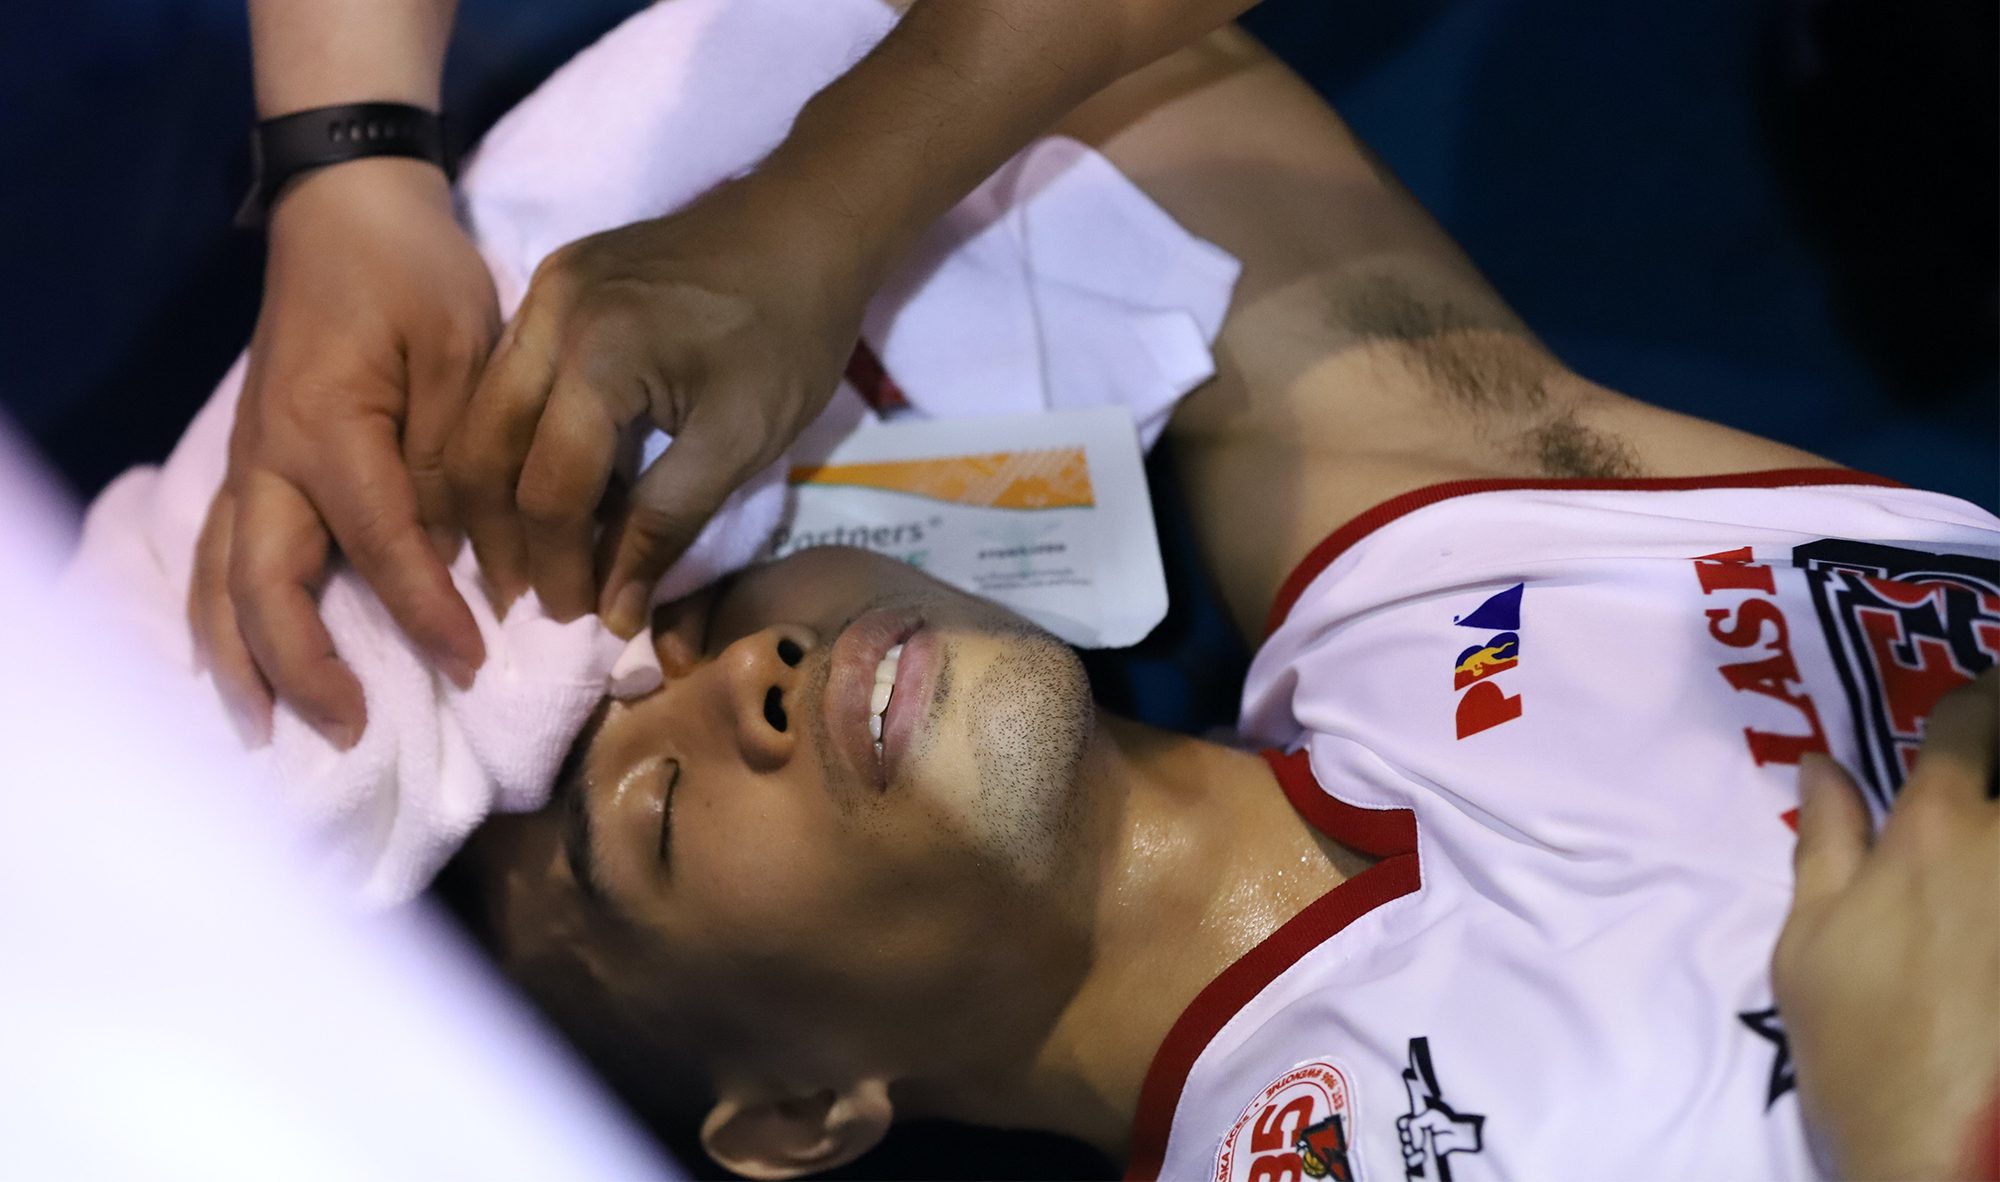 Sigh of relief for Alaska as Galliguez cleared from head injuries